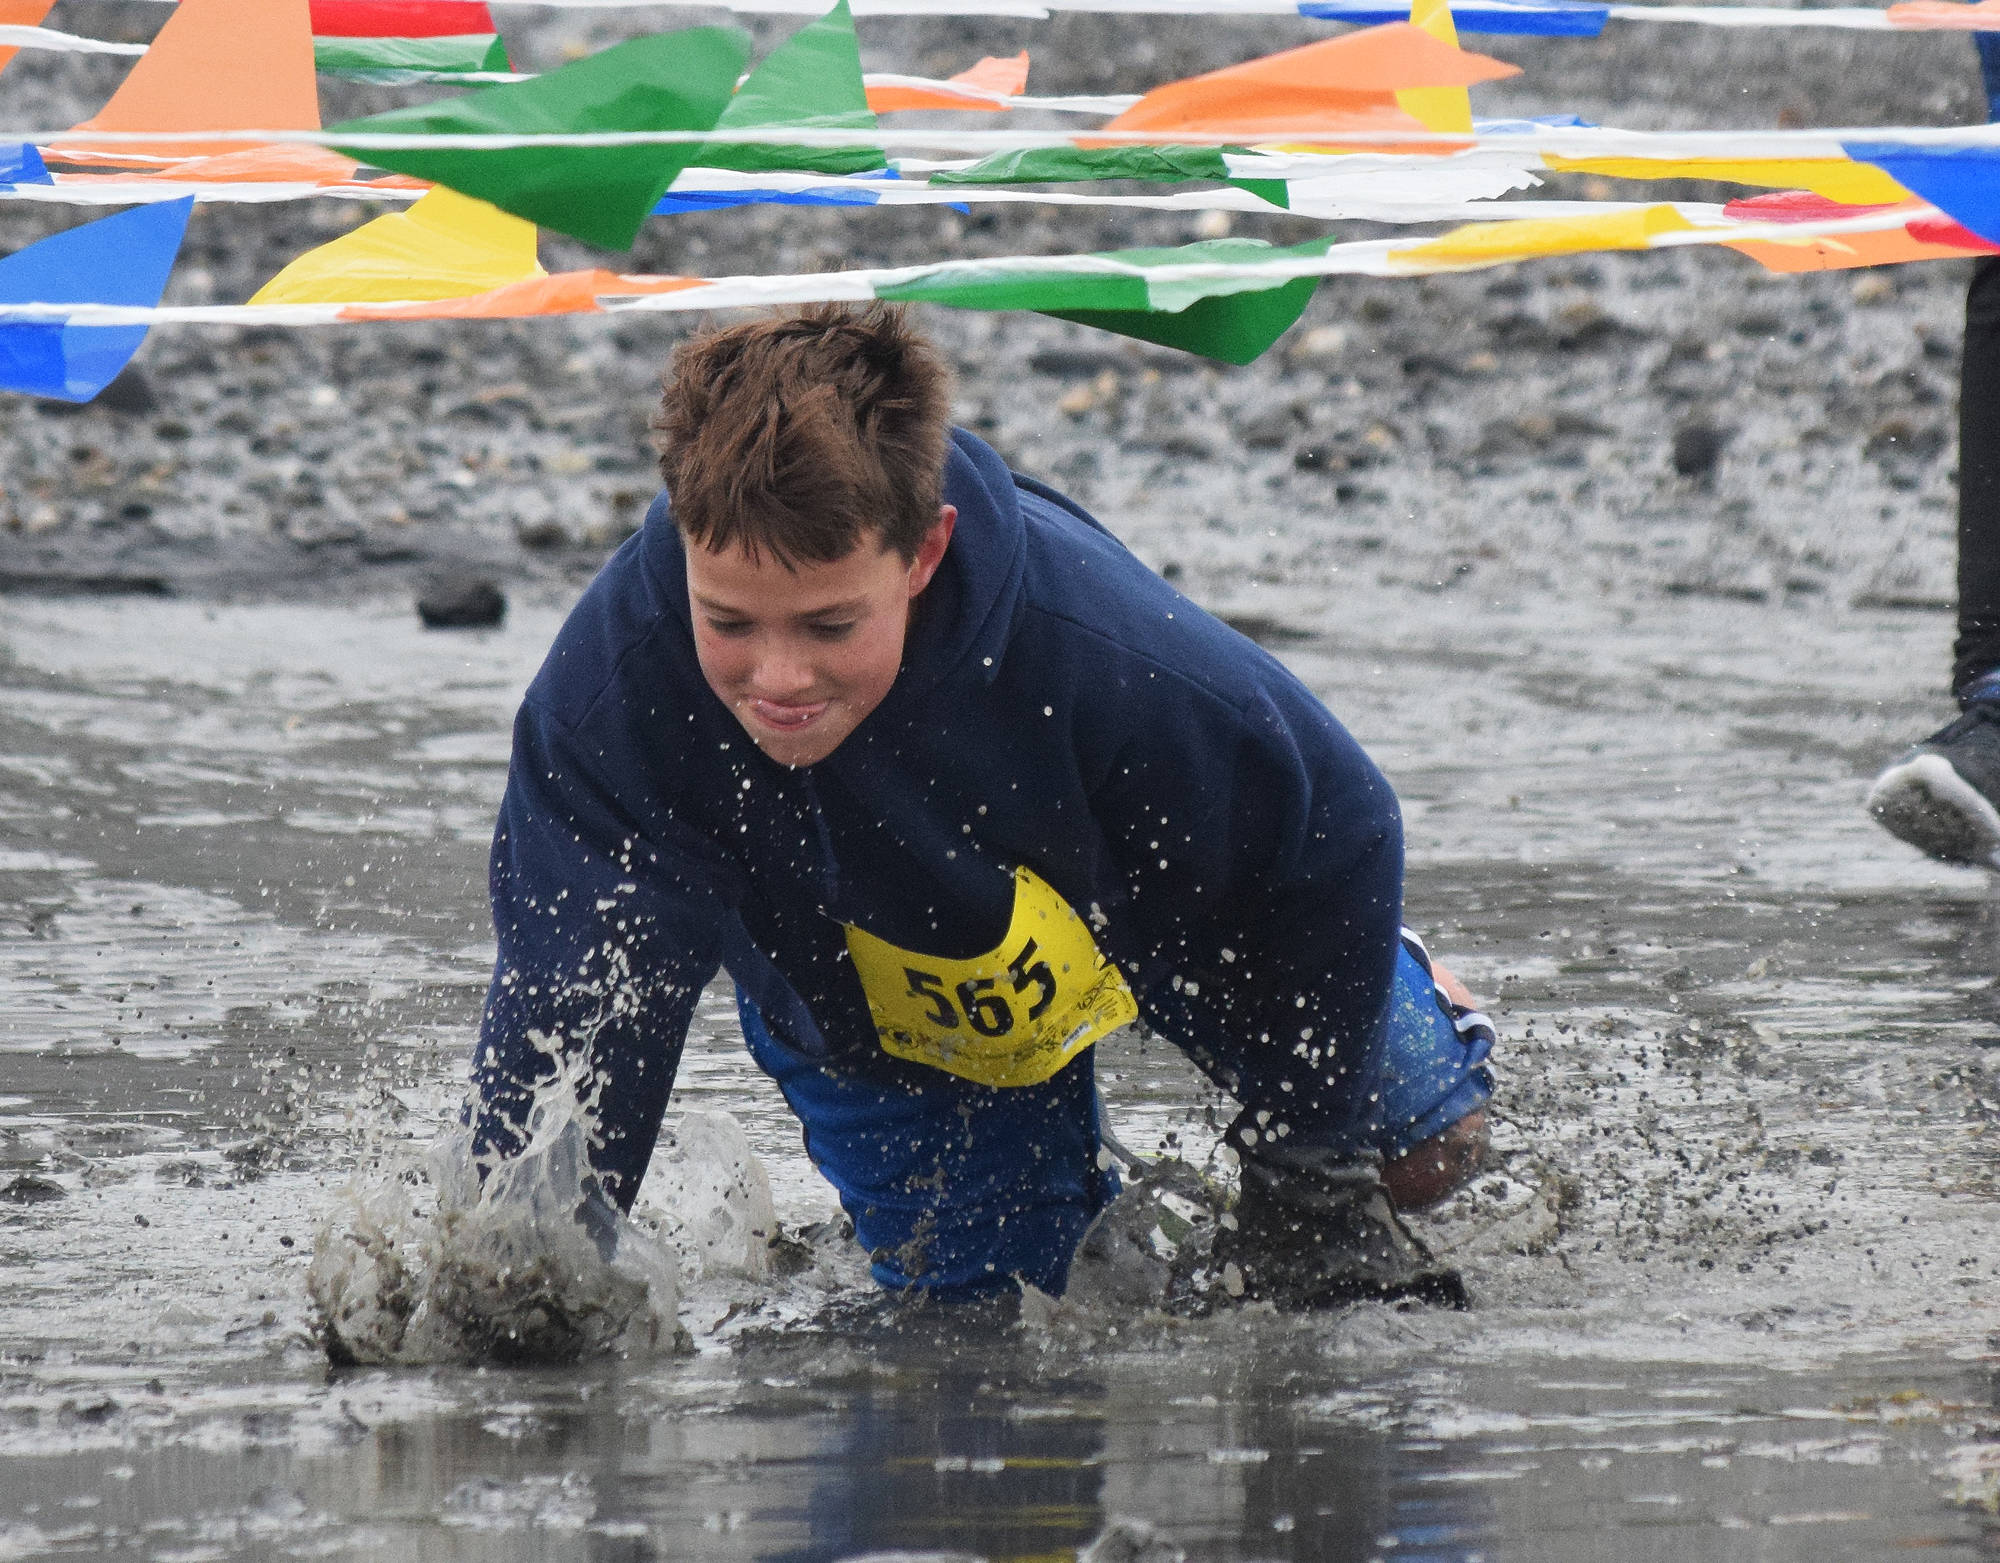 Carter Lemons splashes his way through the mud crawl Saturday at the fourth annual Clam Scramble 5K in Ninilchik. (Photo by Joey Klecka/Peninsula Clarion)